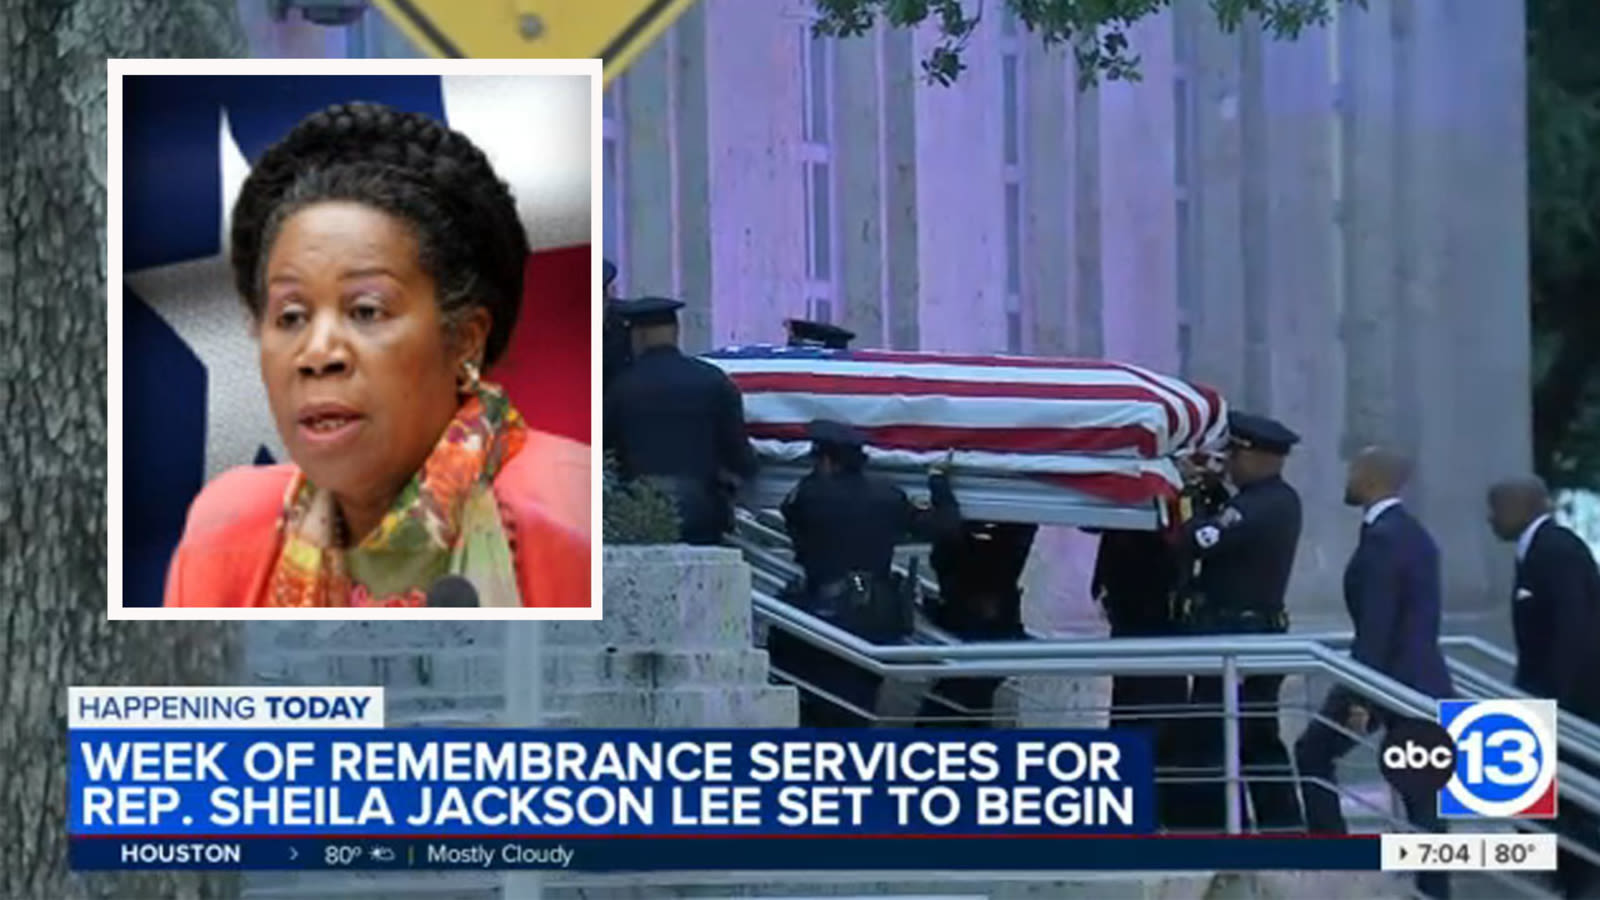 Congresswoman Sheila Jackson Lee lies in state at City Hall as part of services honoring life